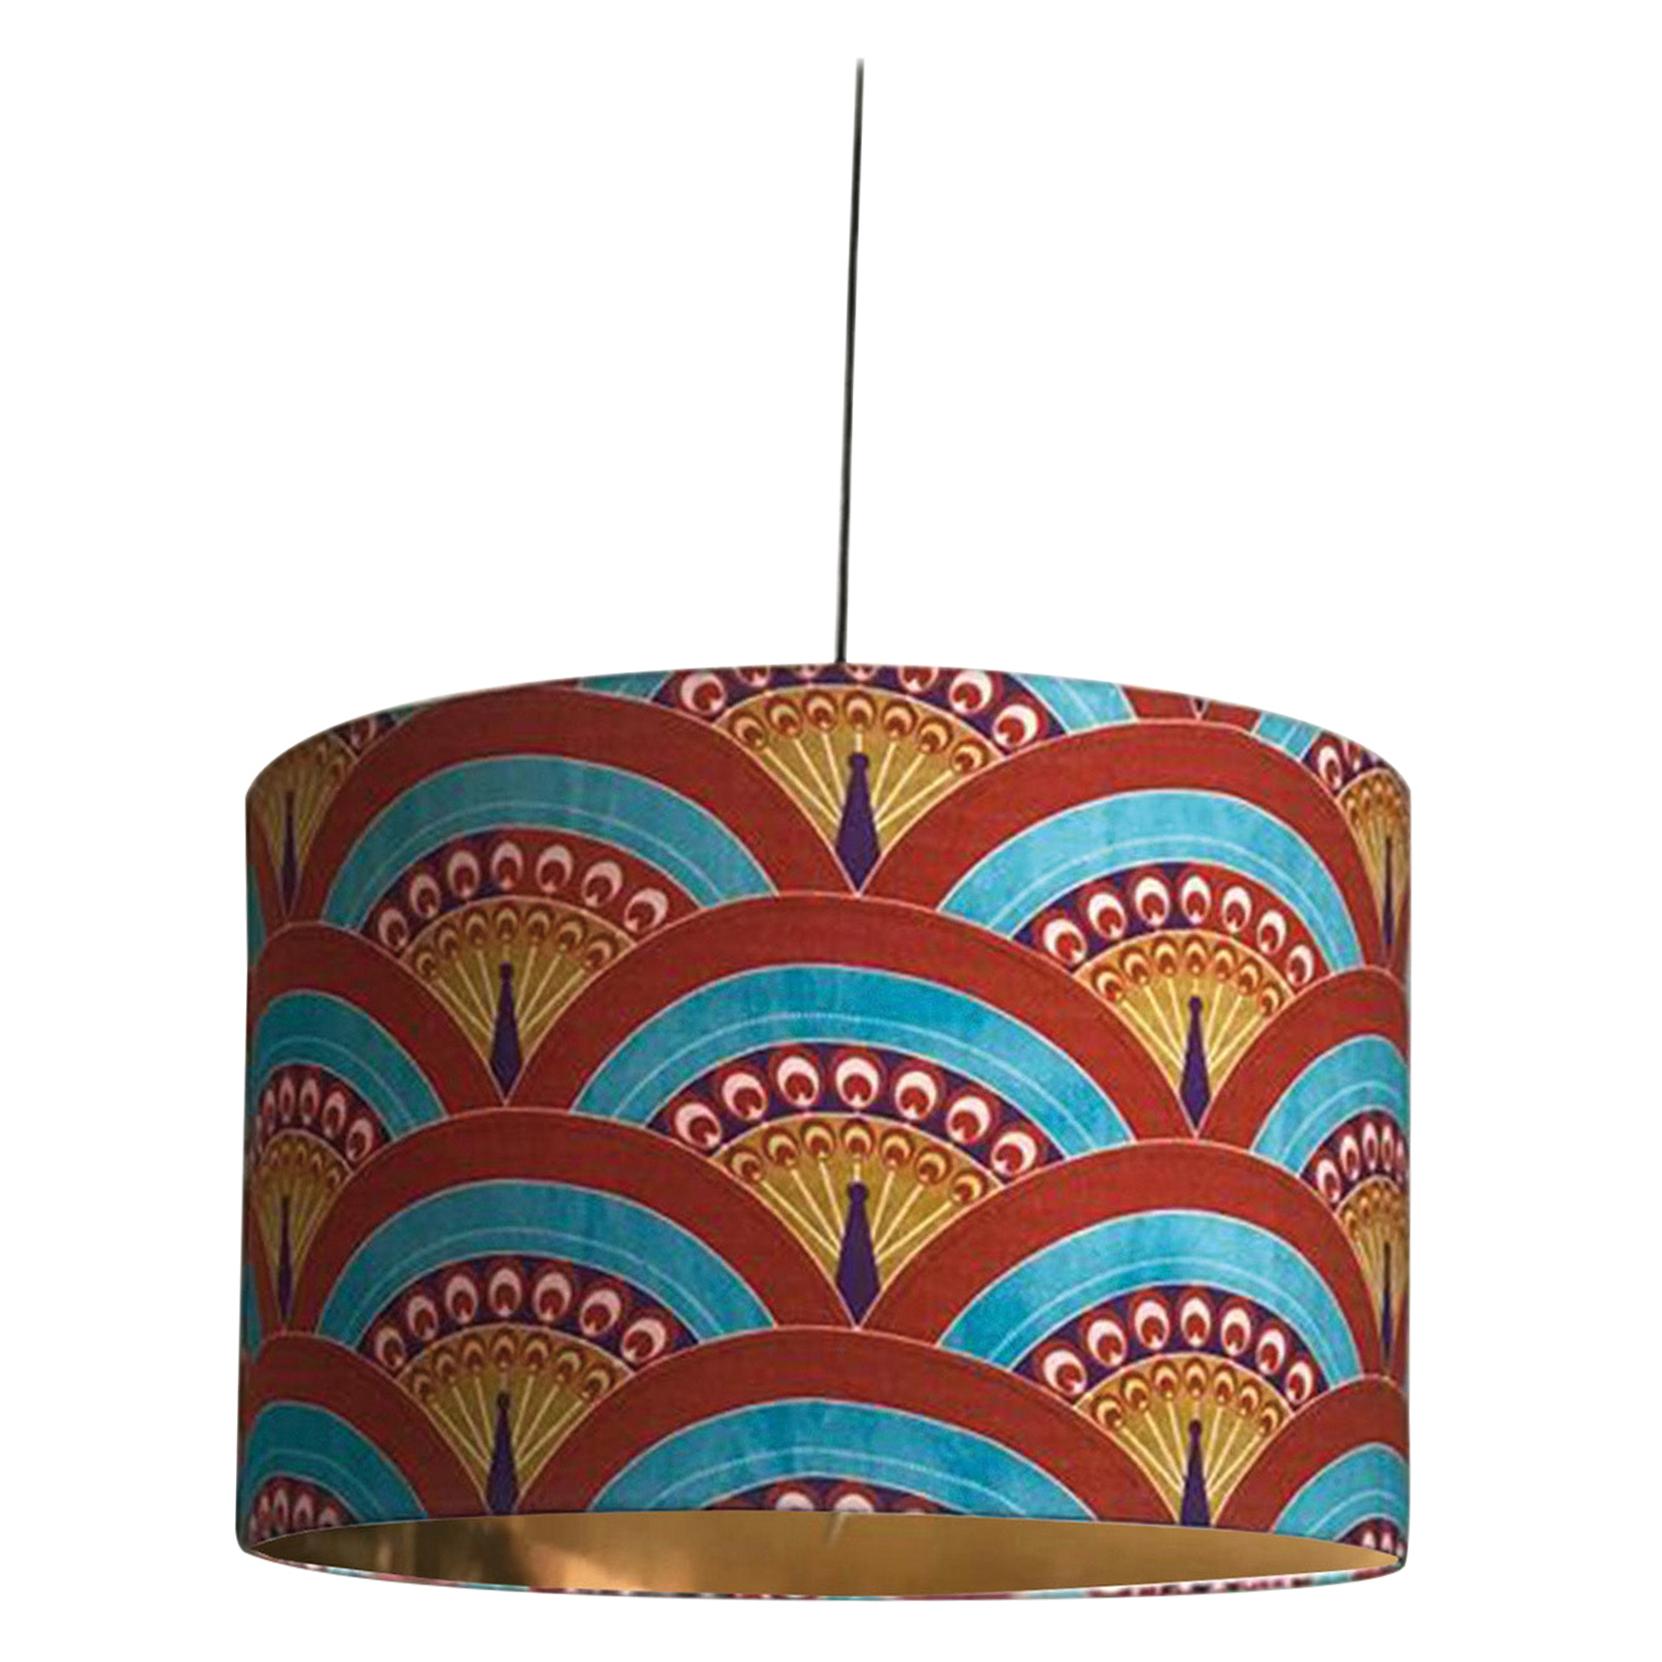 Matthew Williamson for Les-Ottomans Peacock Lampshade For Sale